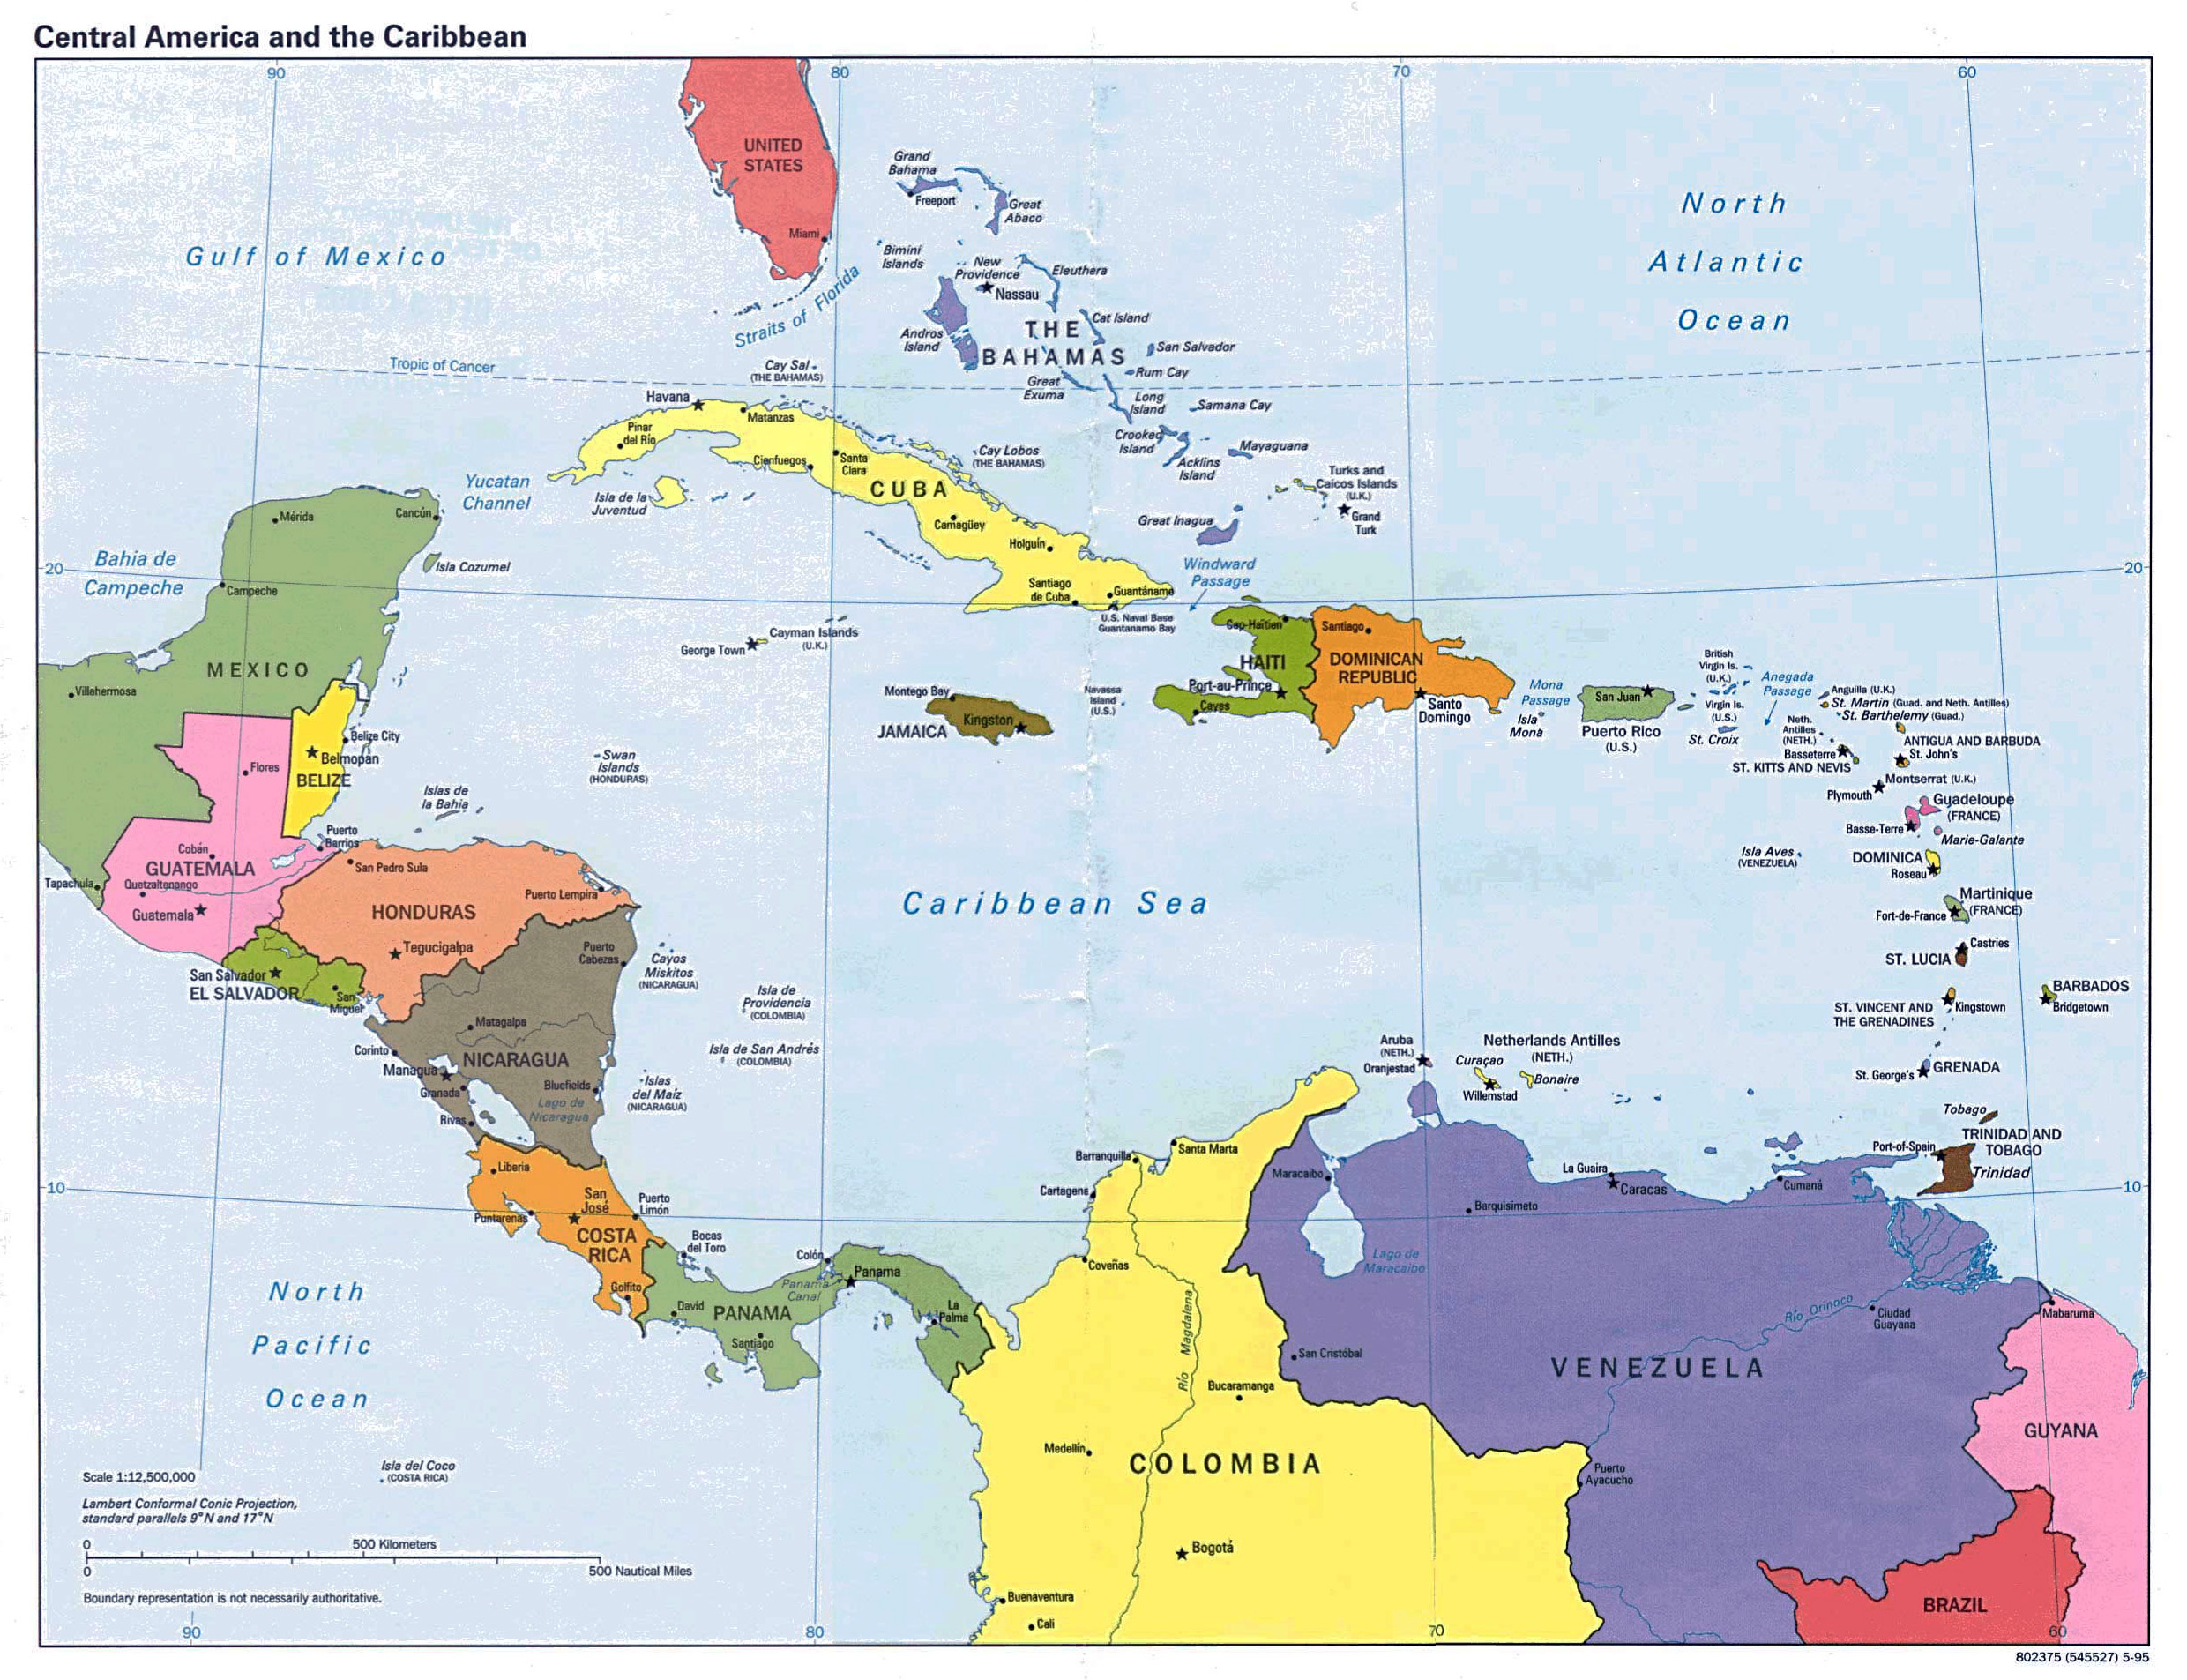 large-detailed-political-map-of-central-america-1995-central-america-and-the-caribbean